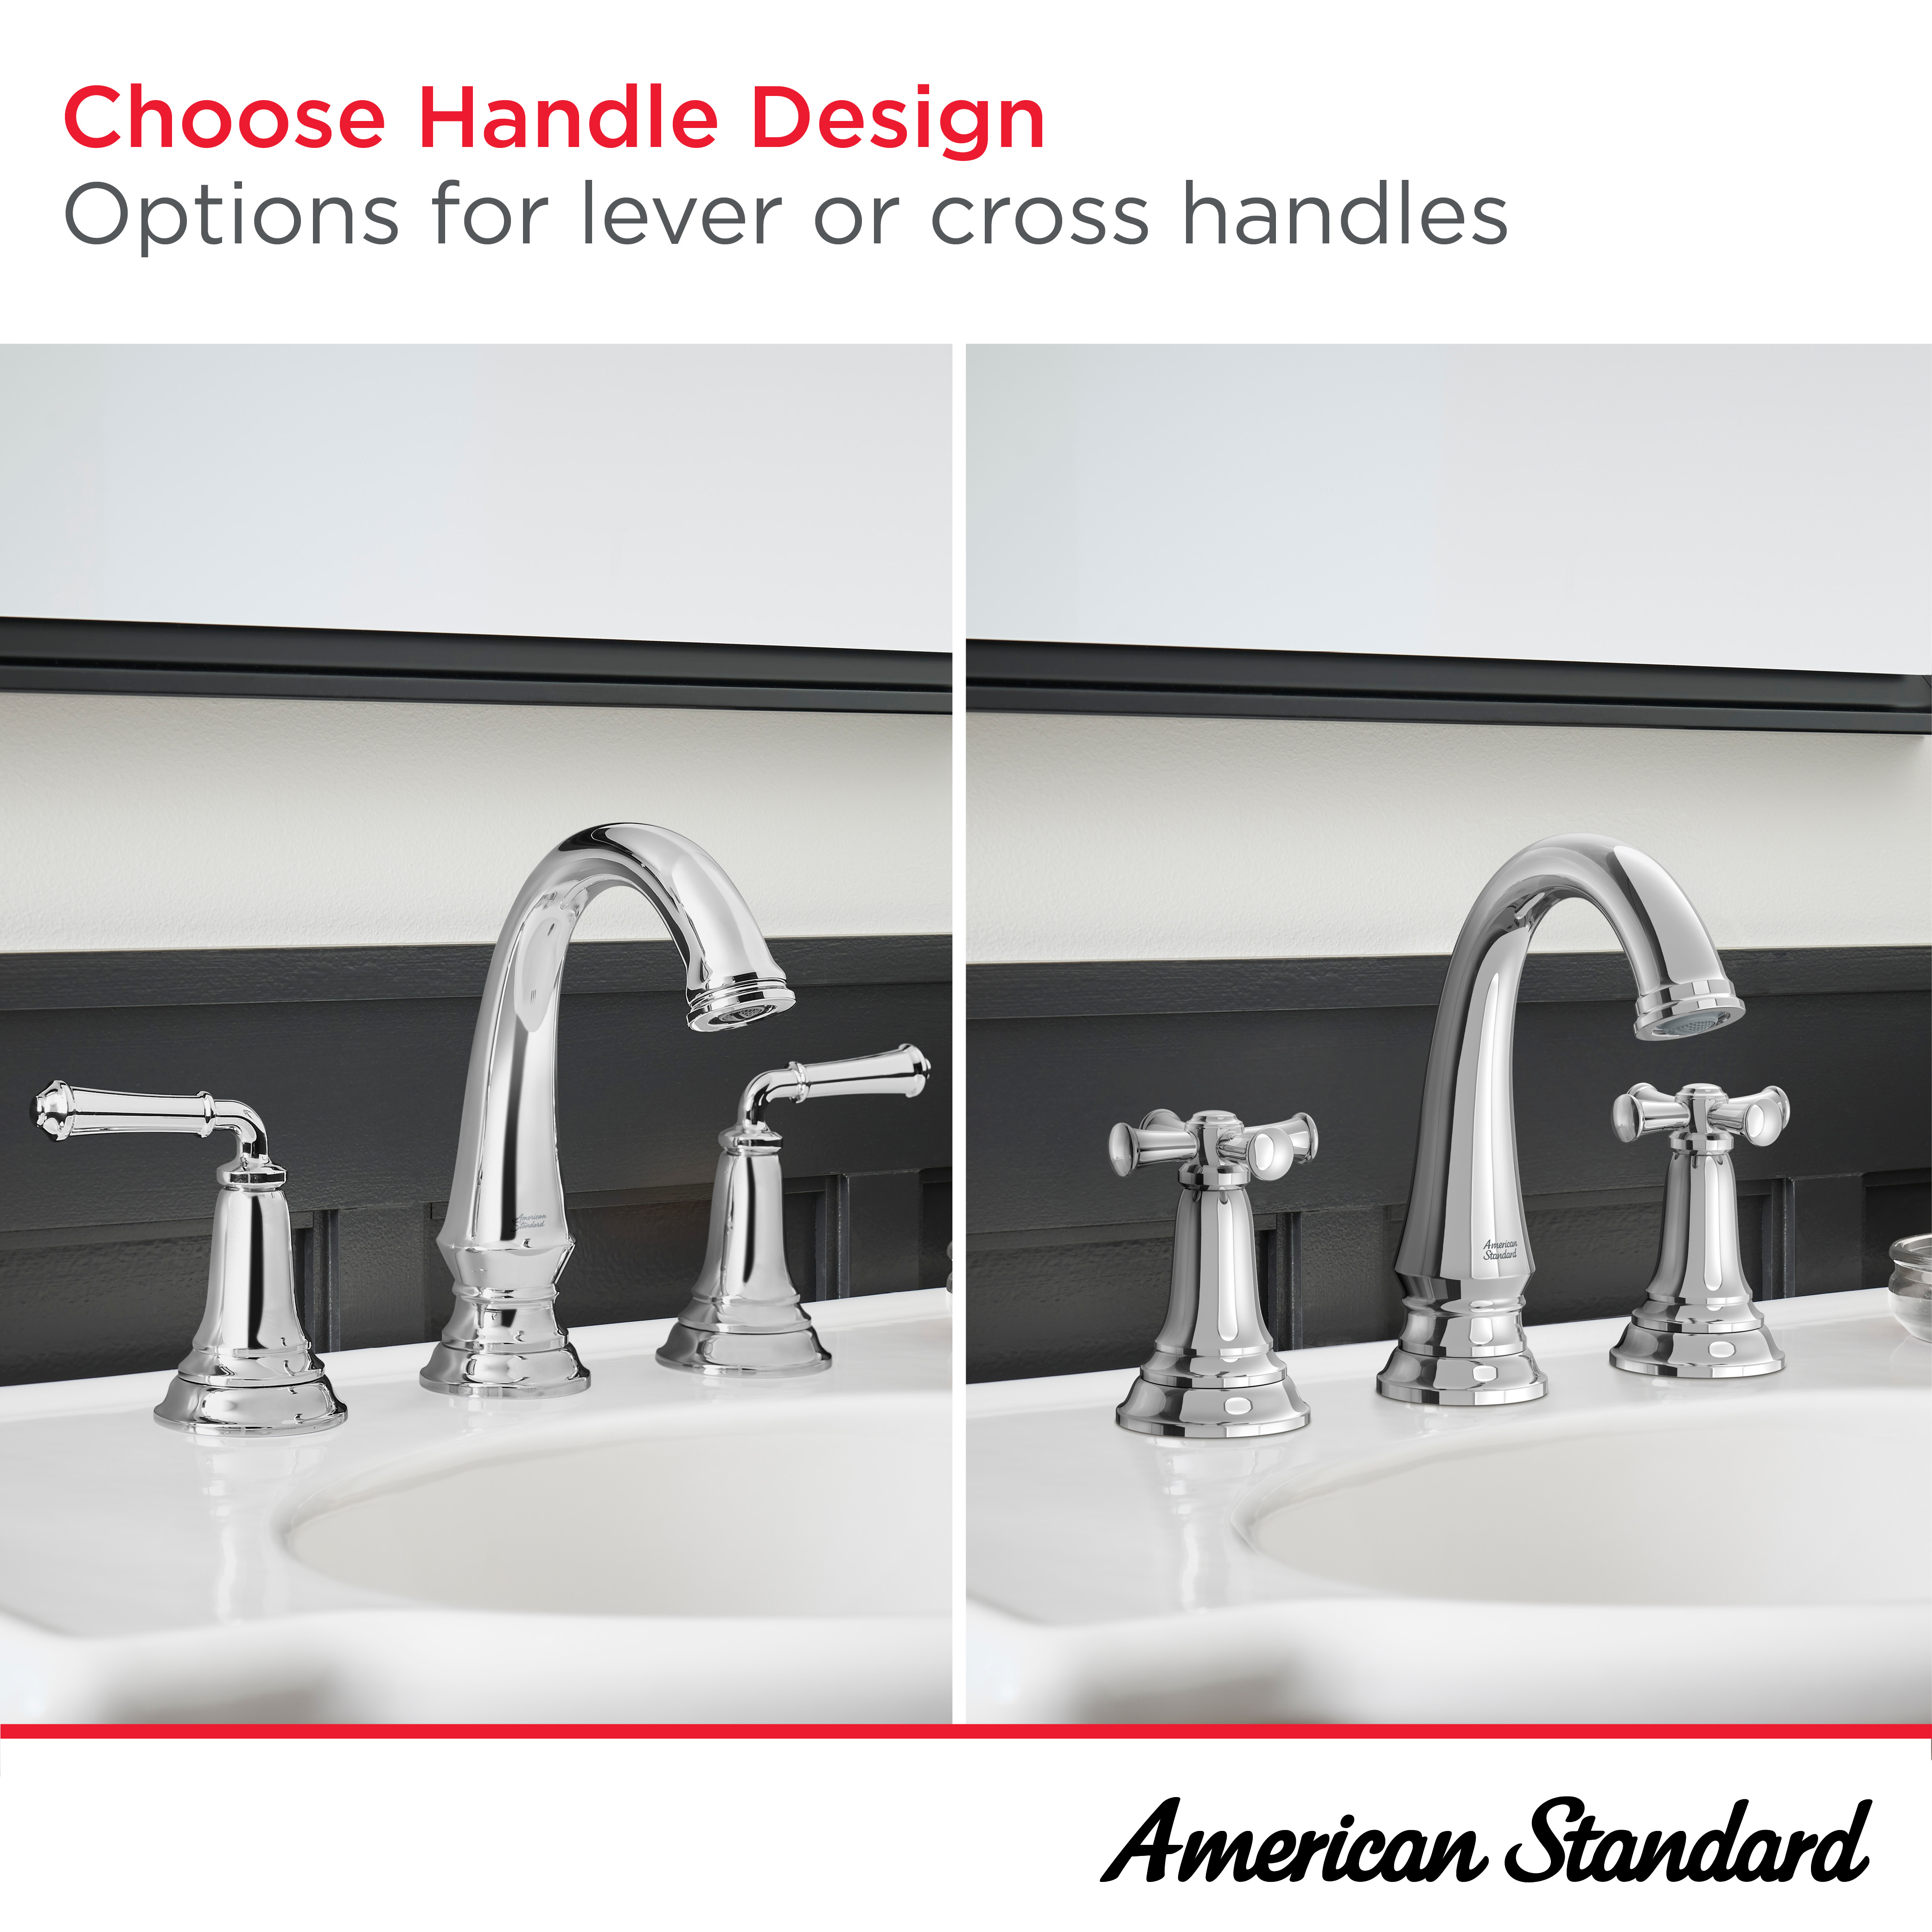 Delancey™ 8-Inch Widespread 2-Handle Bathroom Faucet 1.2 gpm/4.5 L/min With Lever Handles